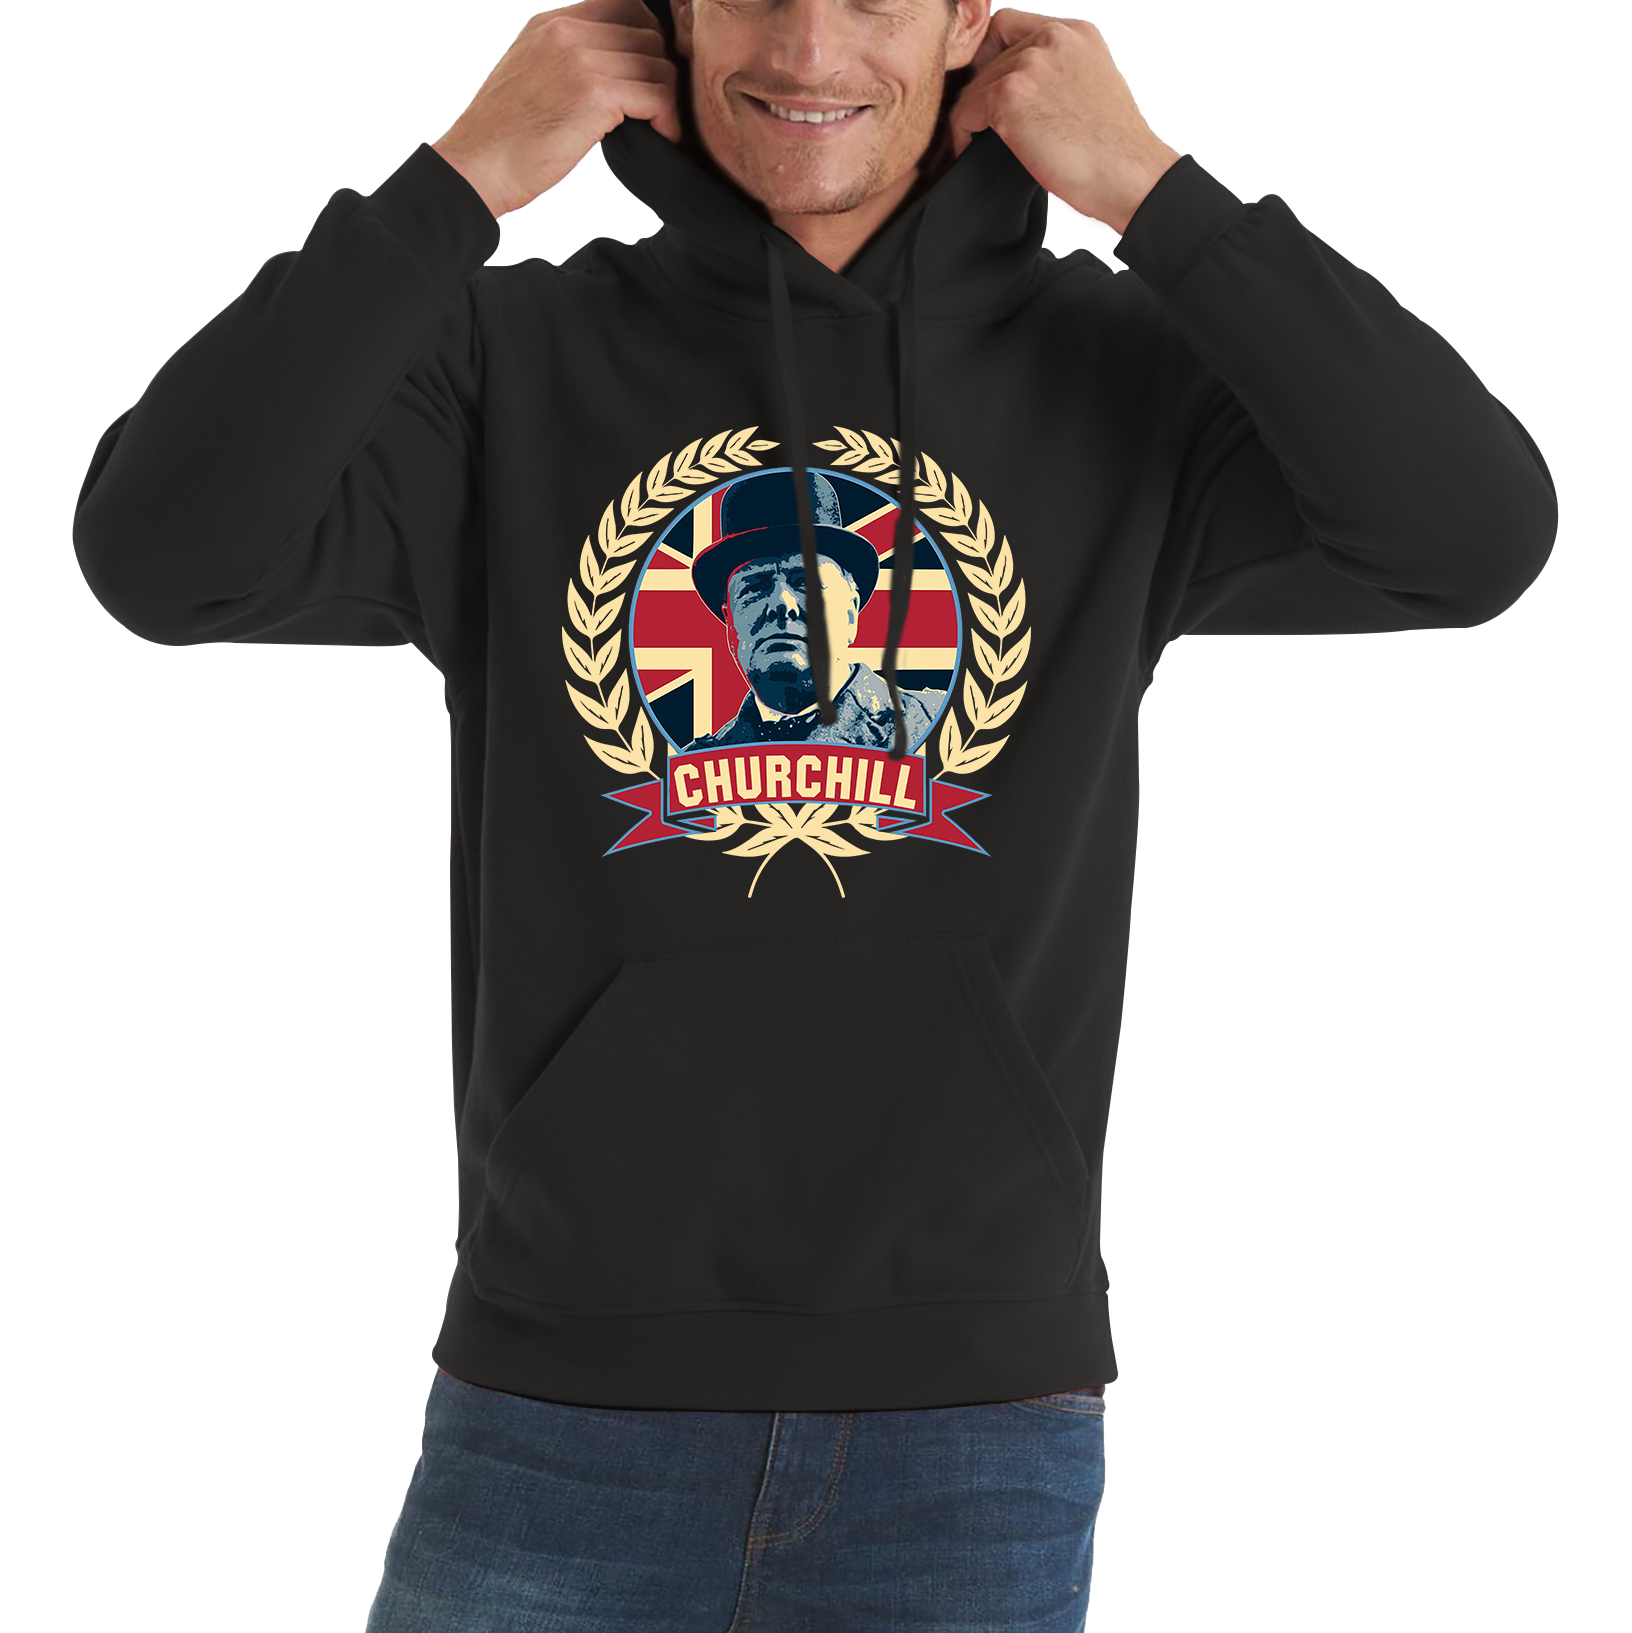 Sir Winston Churchill Prime Minister of the United Kingdom Adult Hoodie